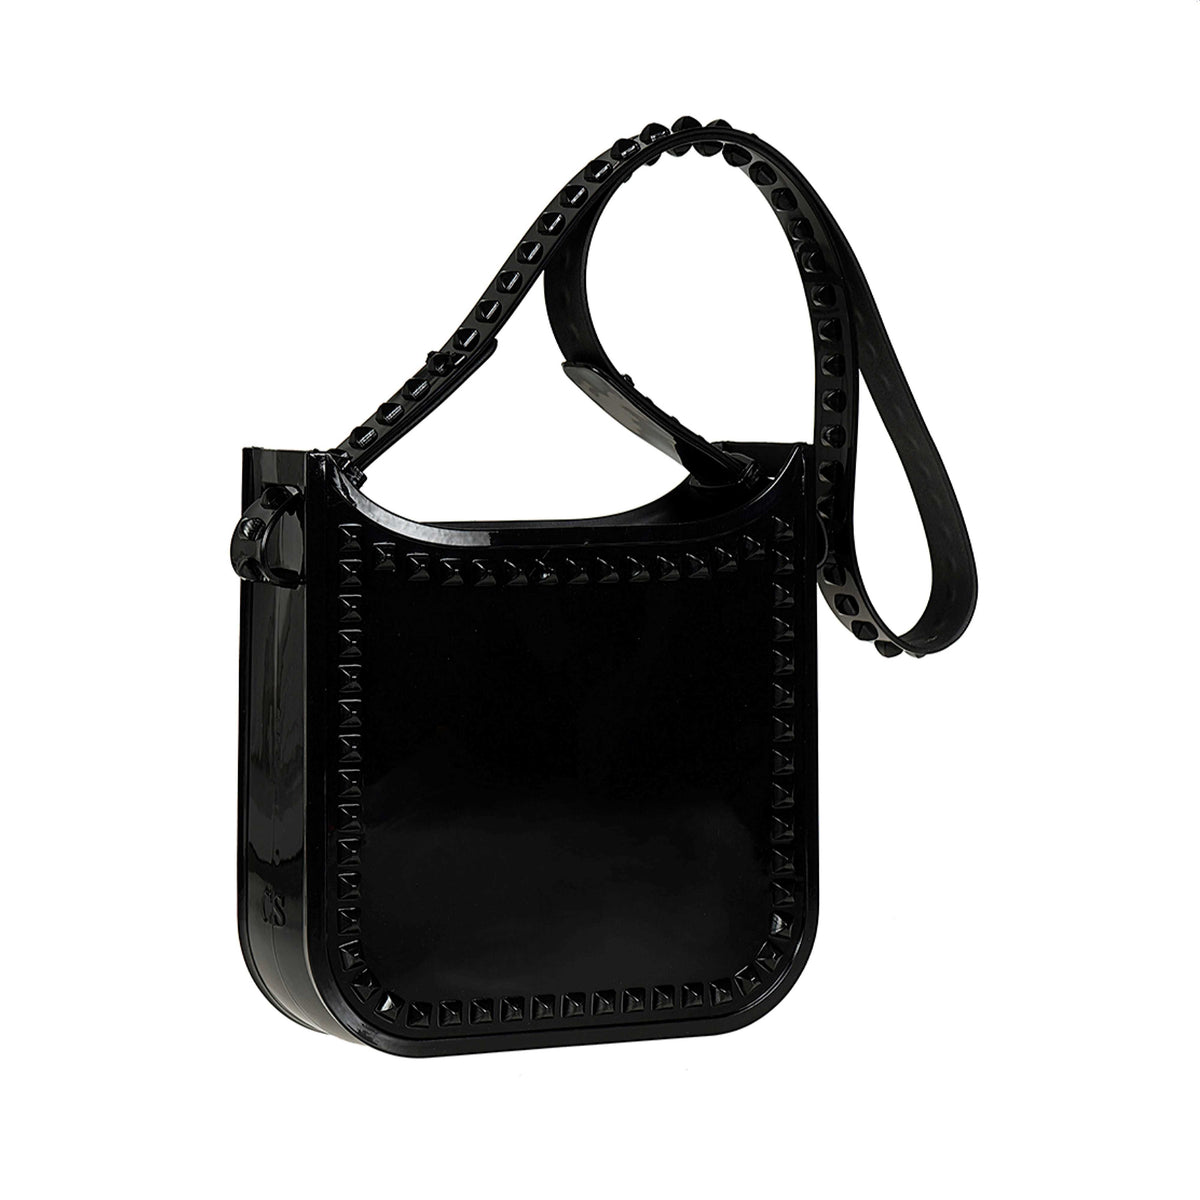 Toni beach bags for women with studs in color black